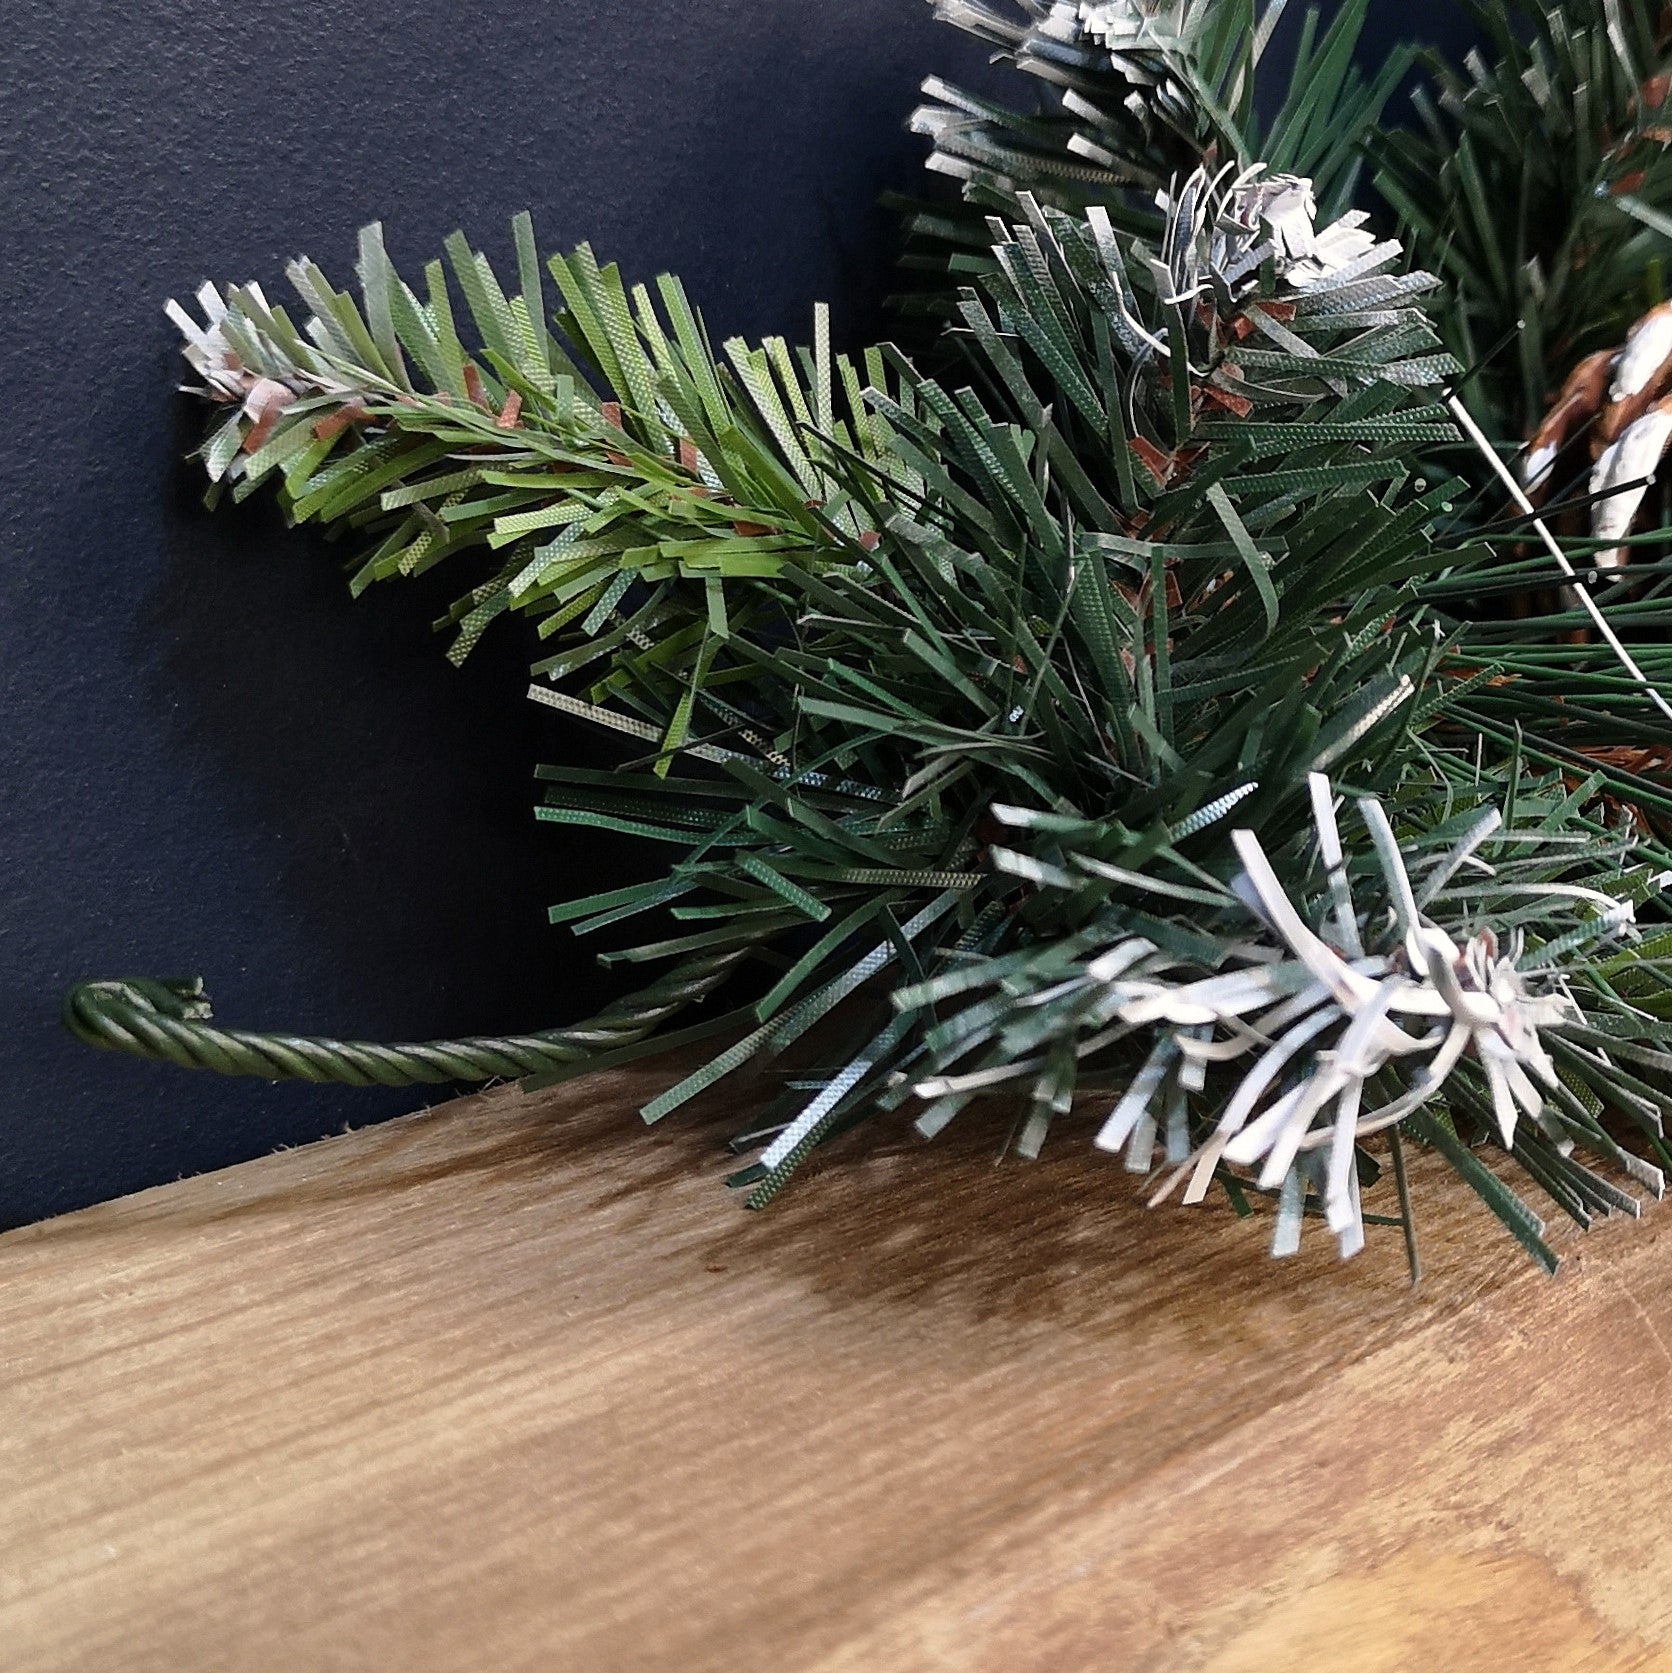 90cm (3ft) Frosted Glacier Christmas Swag with Pine Cones